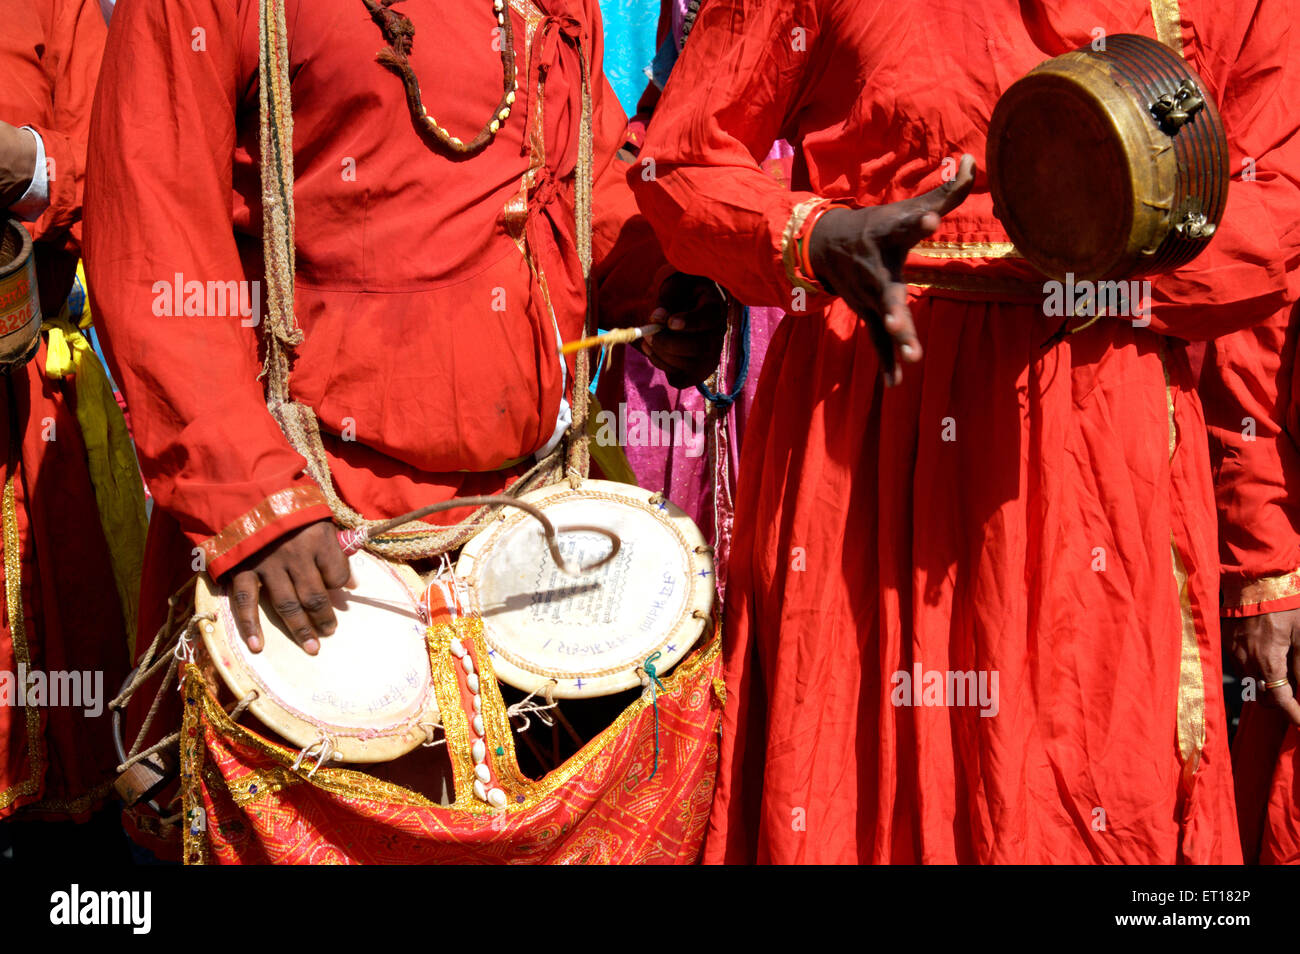 Men playing folk musical instruments drums, India Stock Photo